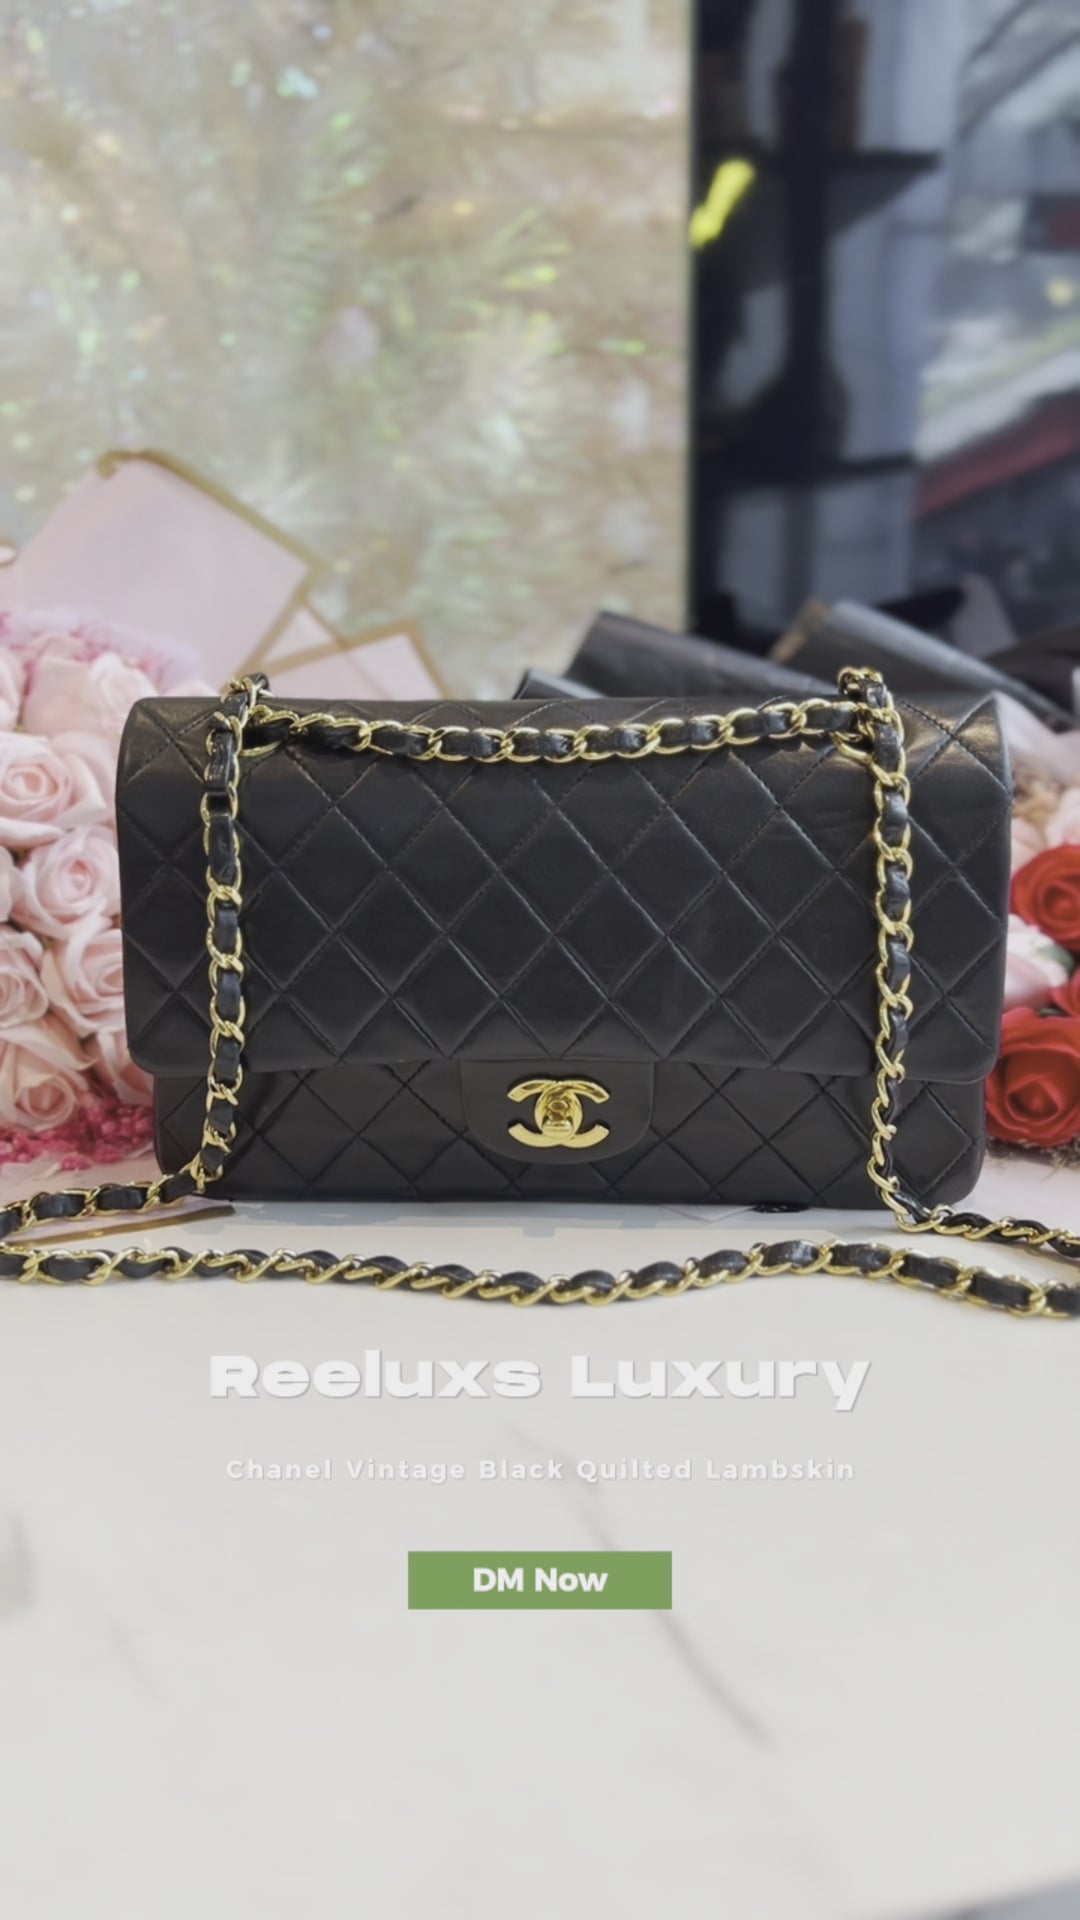 Chanel Vintage Black Quilted Lambskin Classic Medium